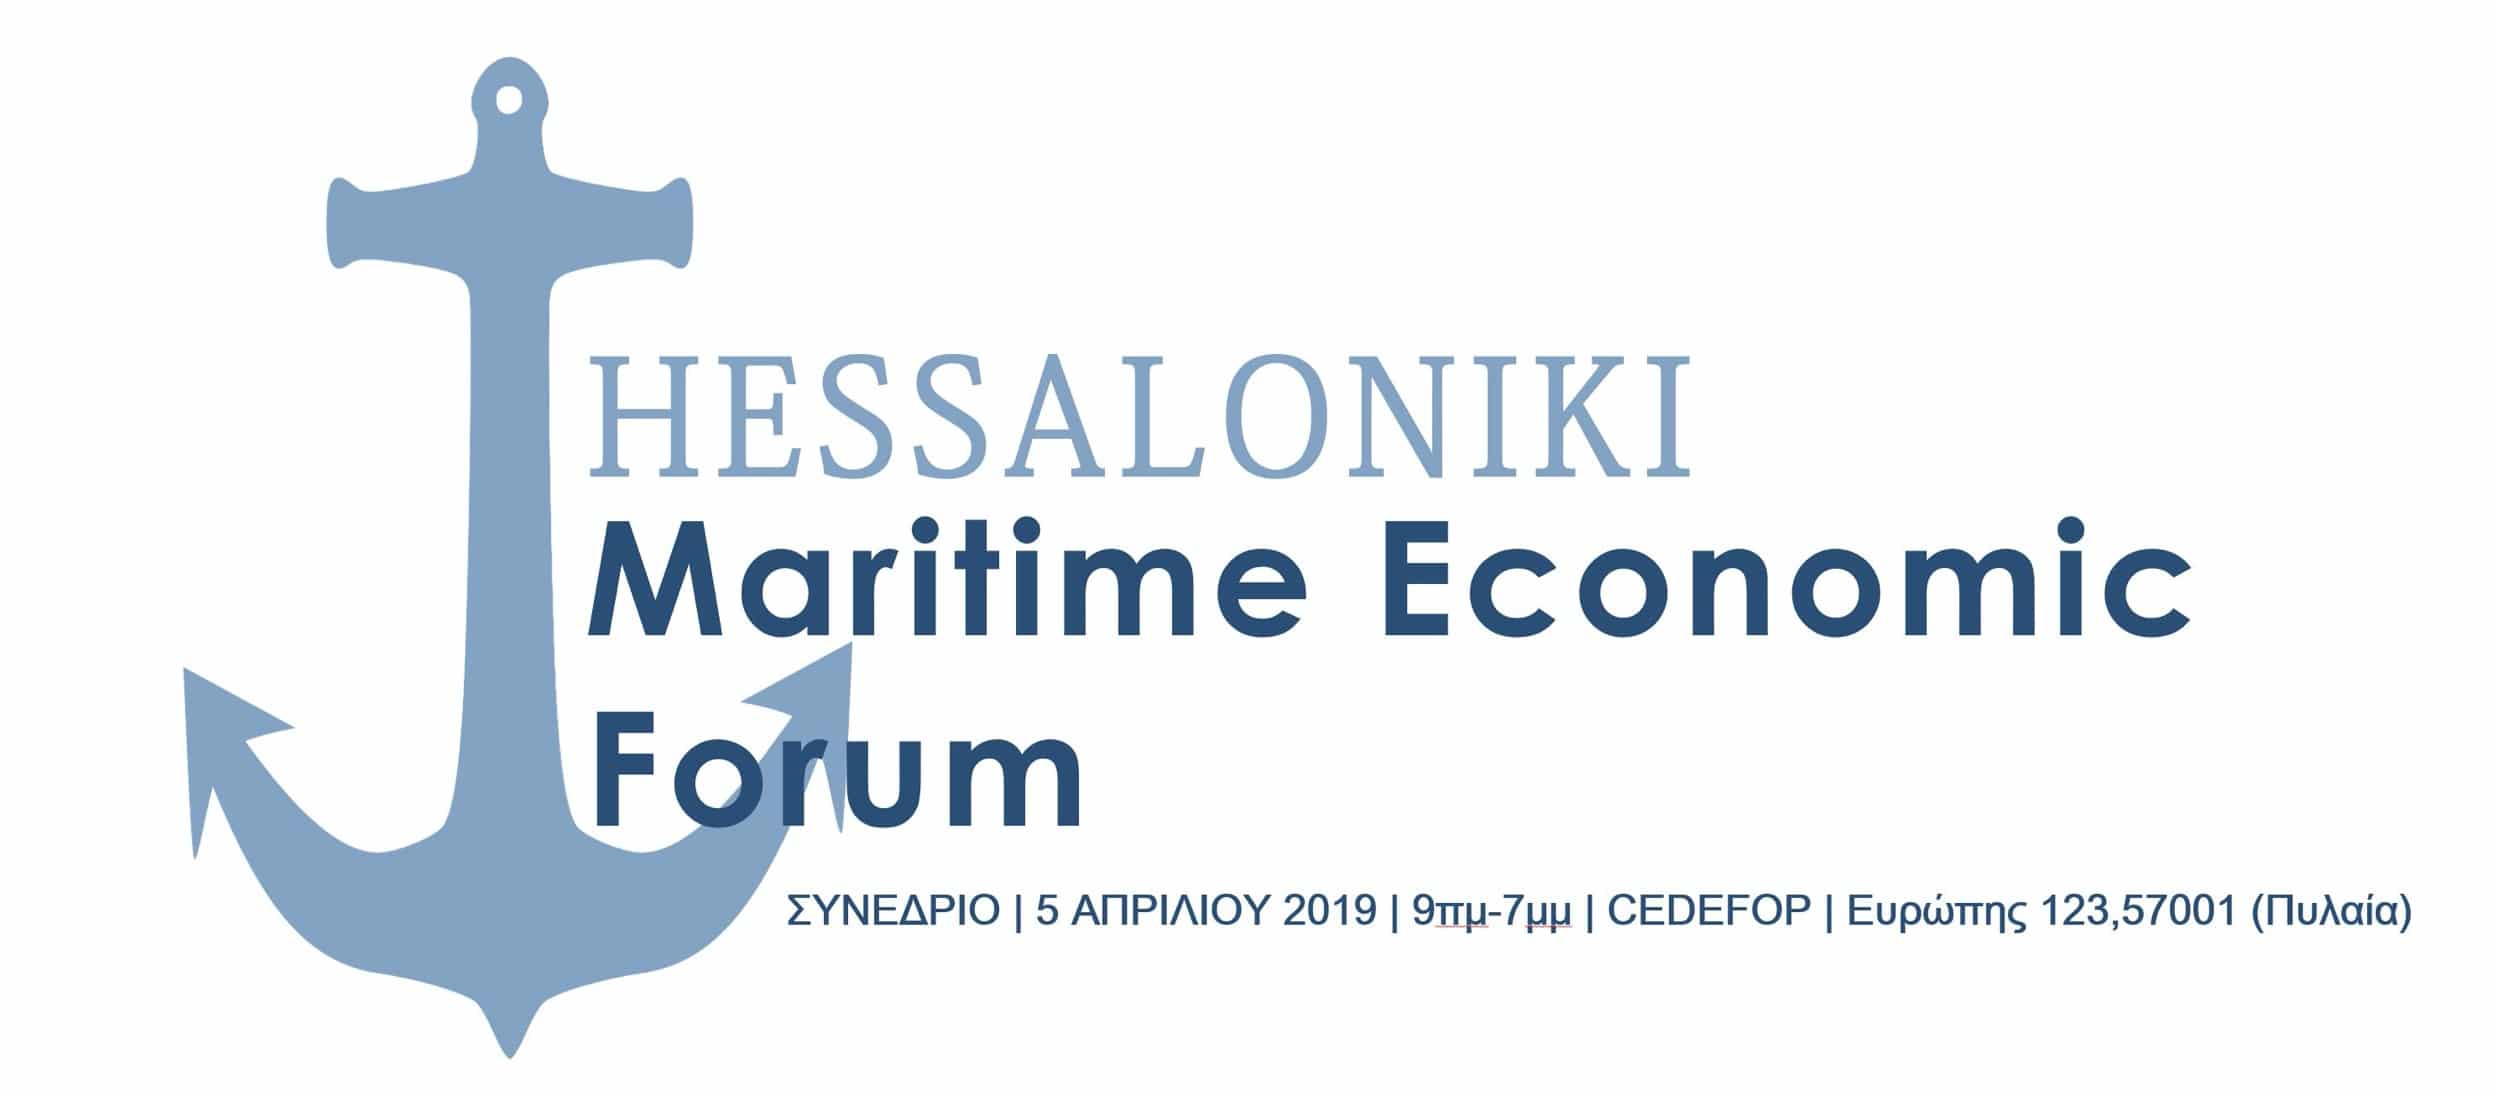 You are currently viewing Thessaloniki Maritime Economic Forum 2019  – “The Economy of Shipping and Blue Development in Thessaloniki & the Value of Education and Vocational Training”